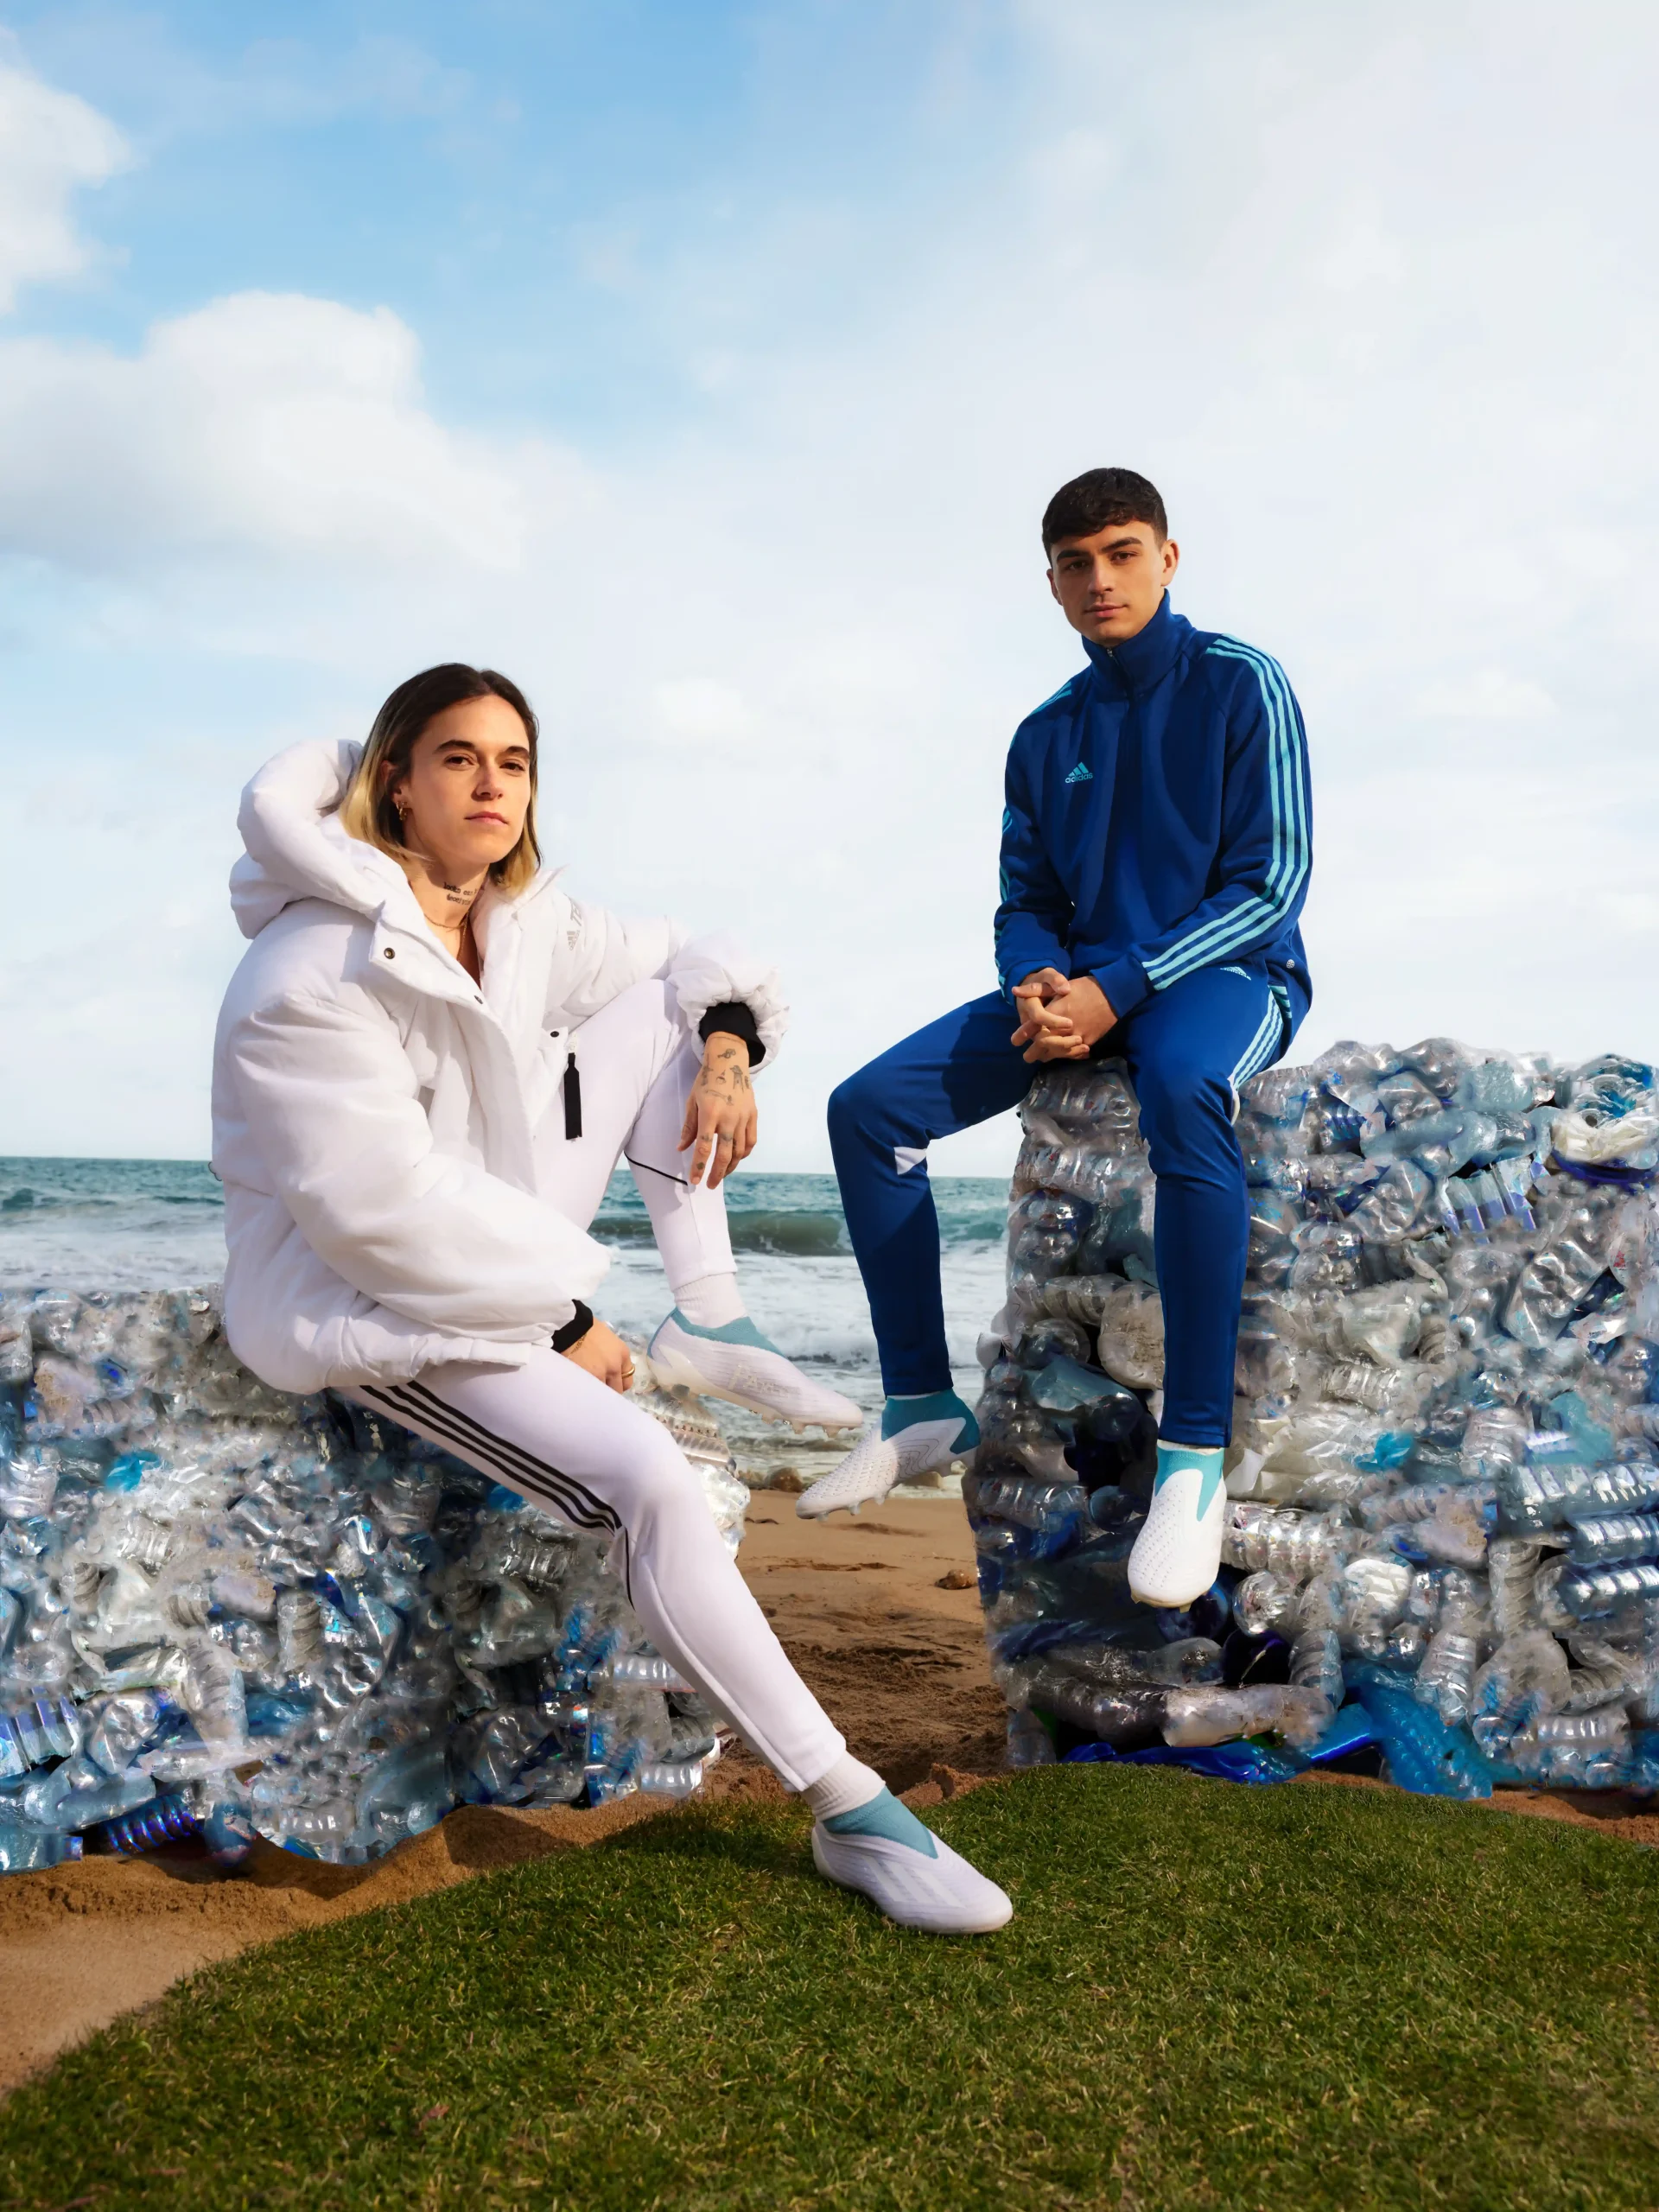 ADIDAS LAUNCHES THE PARLEY PACK - © Copyright PLPG GLOBAL MEDIA 2023